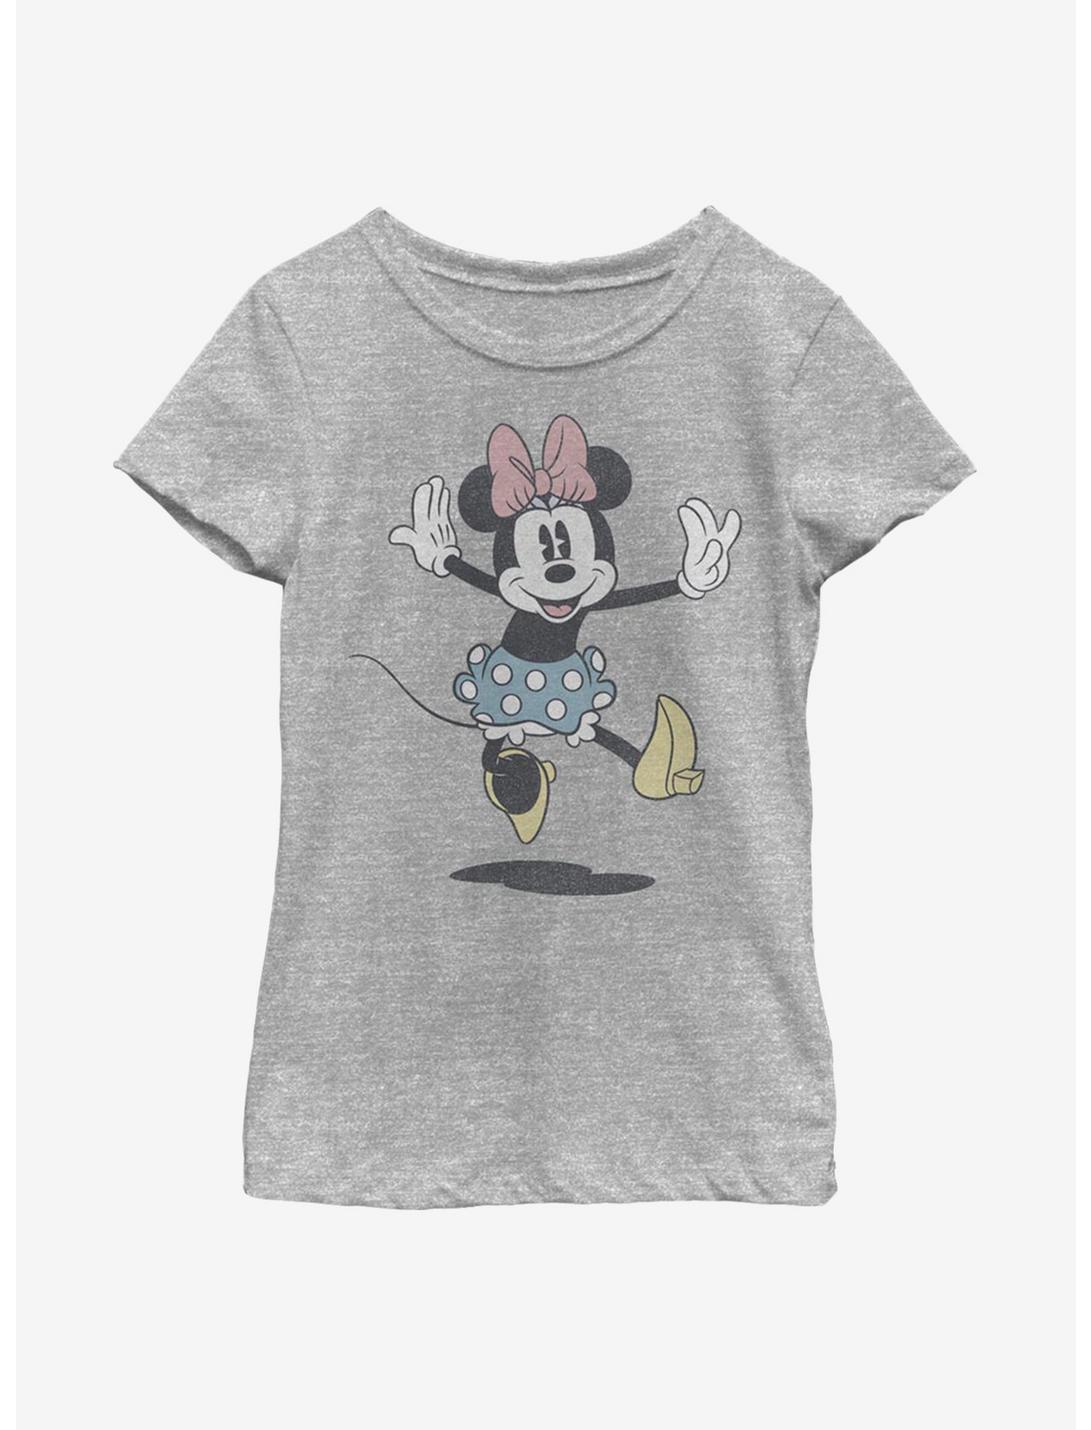 Disney Mickey Mouse Minnie Jump Youth Girls T-Shirt, ATH HTR, hi-res